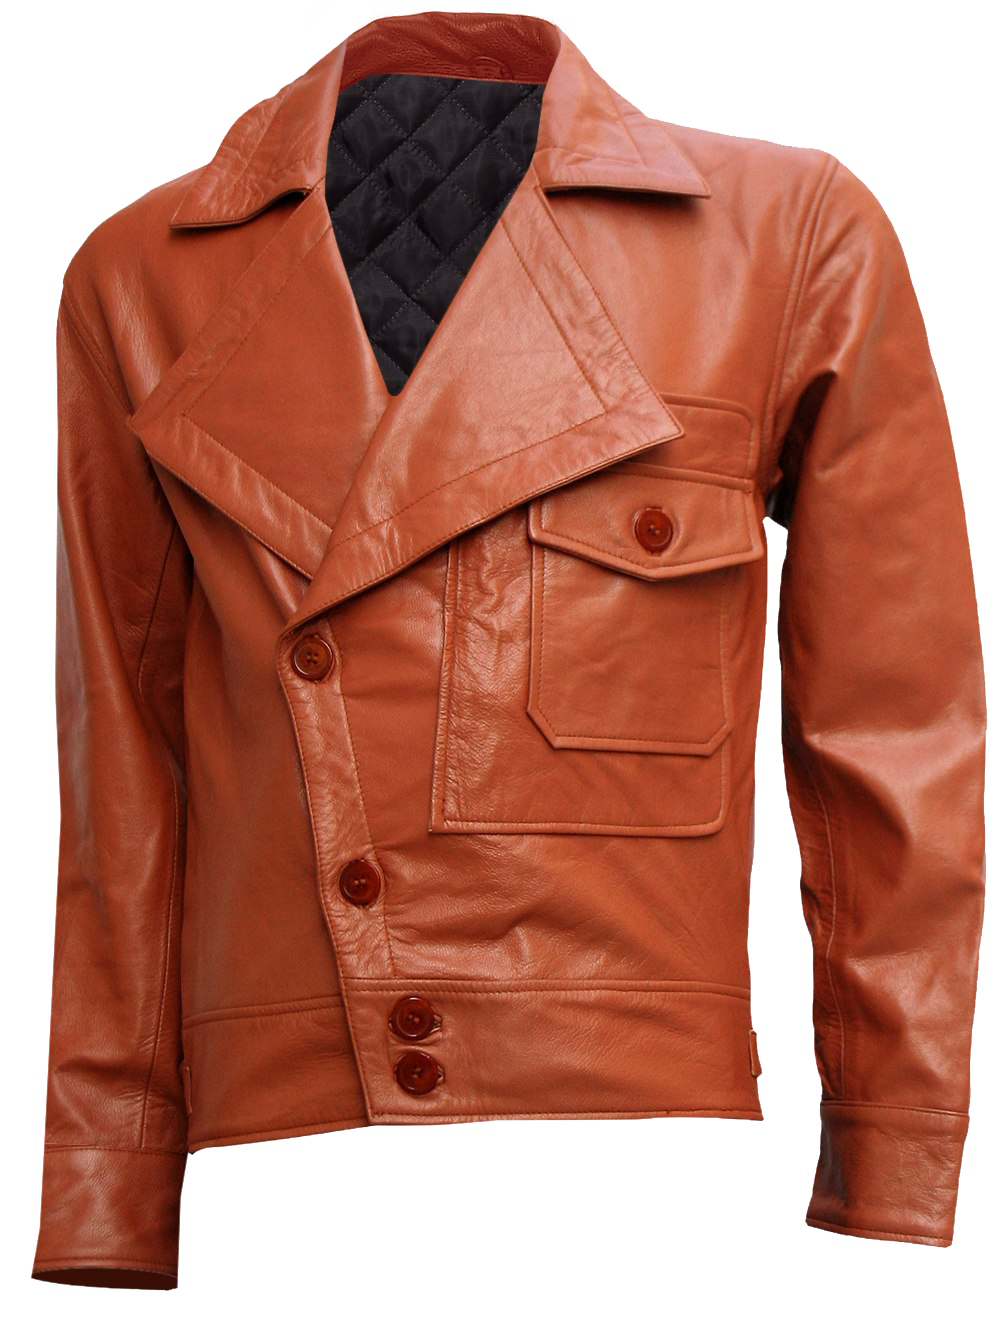 Leather Jacket PNG Free Image